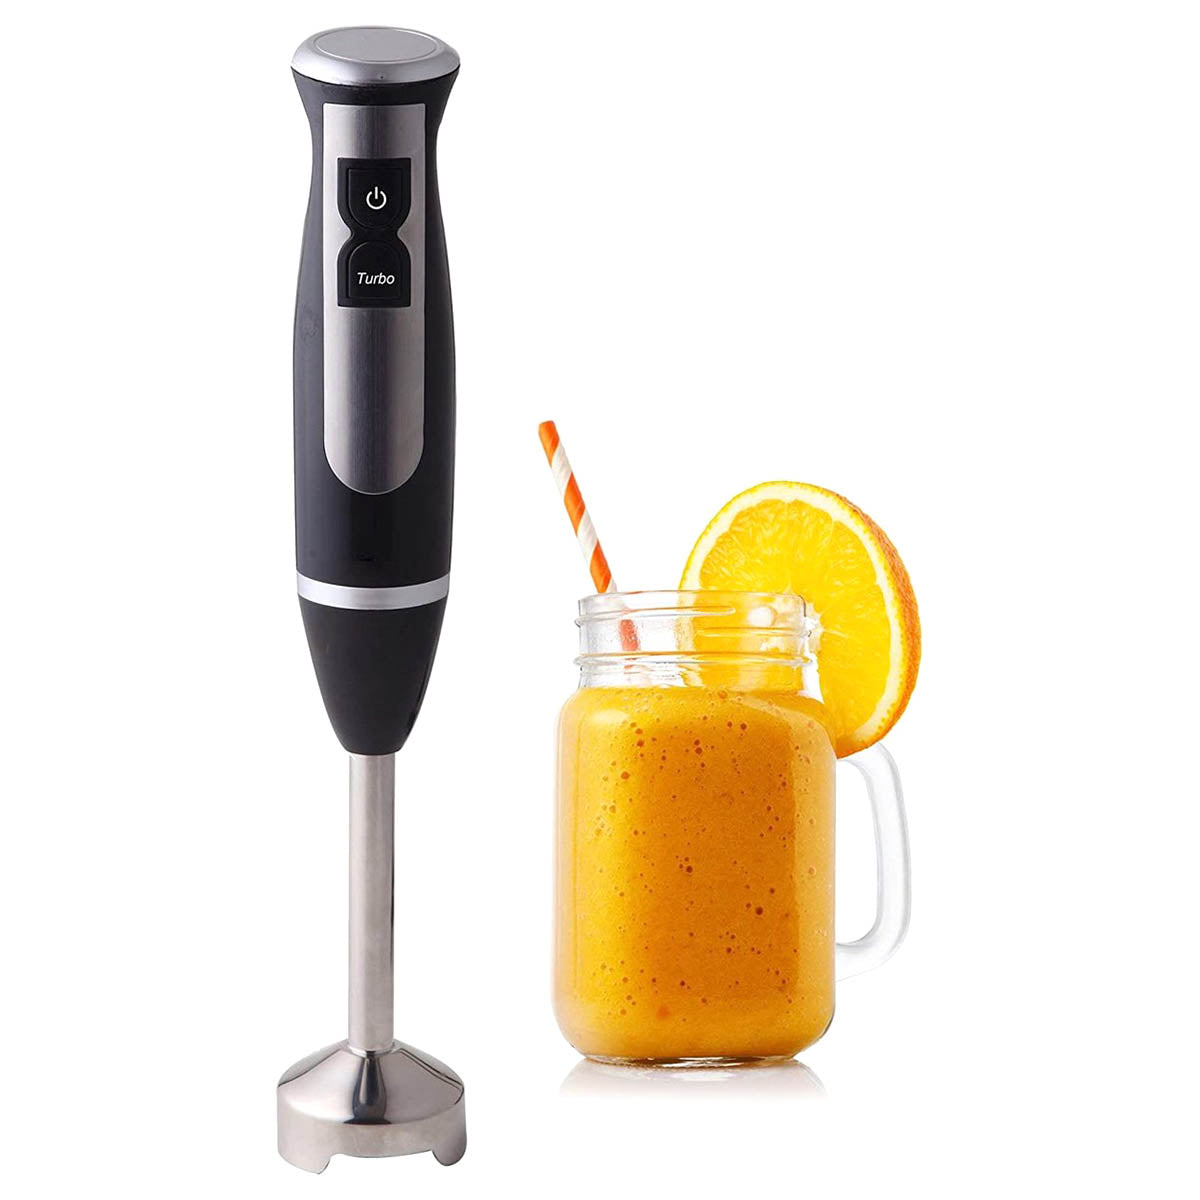 <tc>Ariko</tc> Turbo Hand Blender 600W - Black - including mixing and measuring reservoir - stainless steel blade - 2 speeds - easy to clean